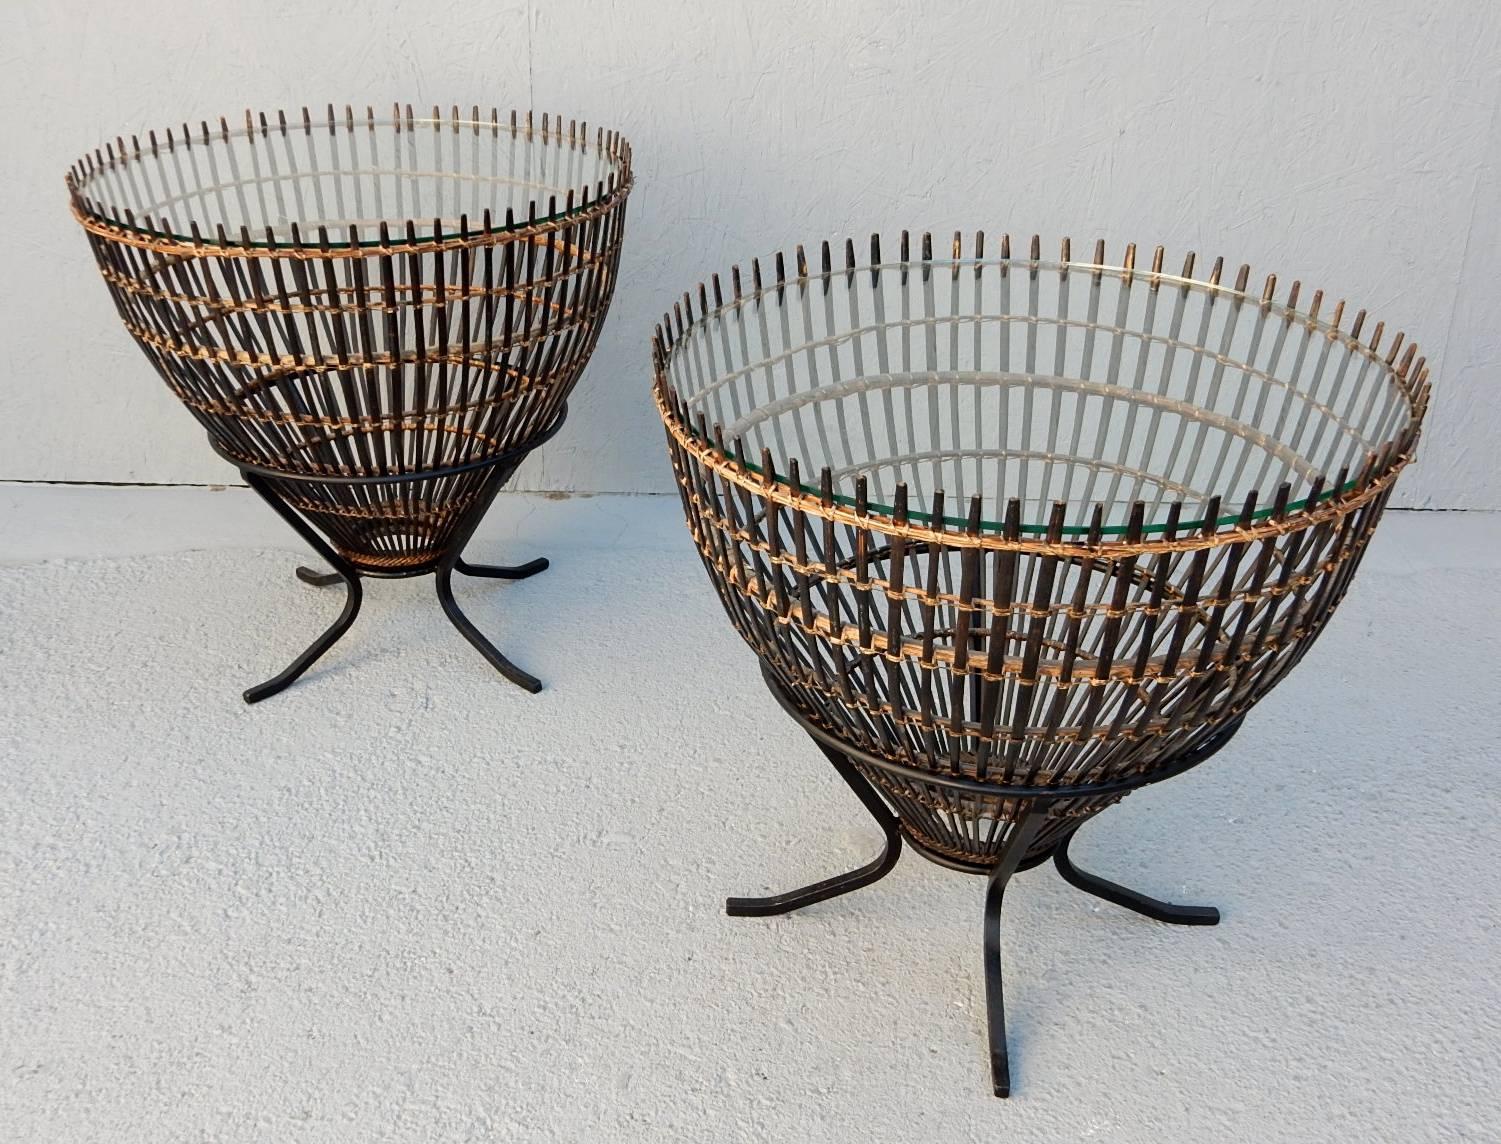 Sculptural fish trap baskets set upside down on custom iron stands with inset glass tops.
Designed by Franco Albini for Raymor.
Both are solid and in excellent original condition.